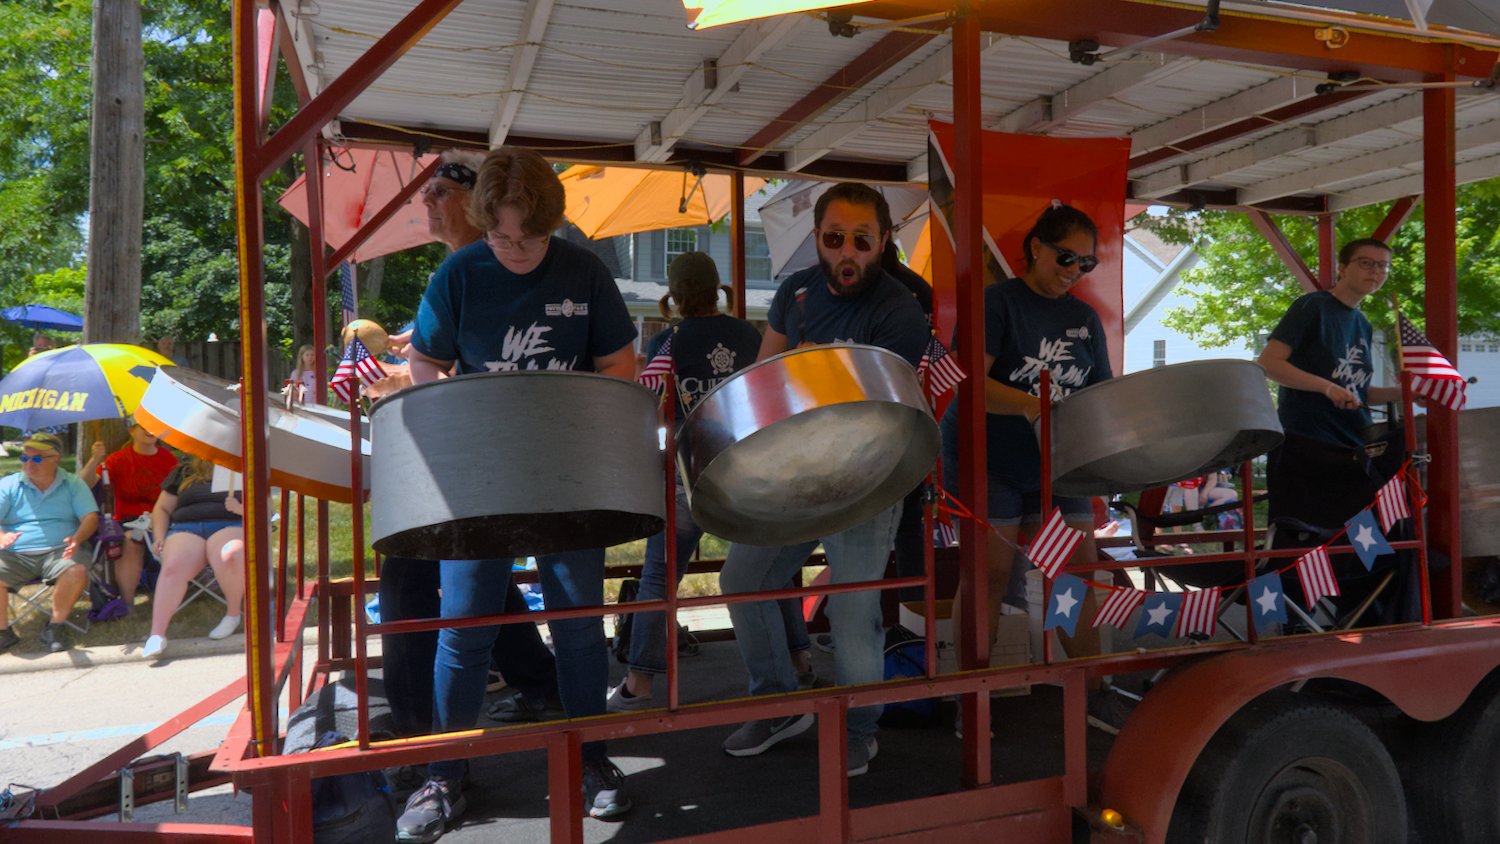 Woodstock Culture, Arts & Music with  Potts & Pans Community Steelband.